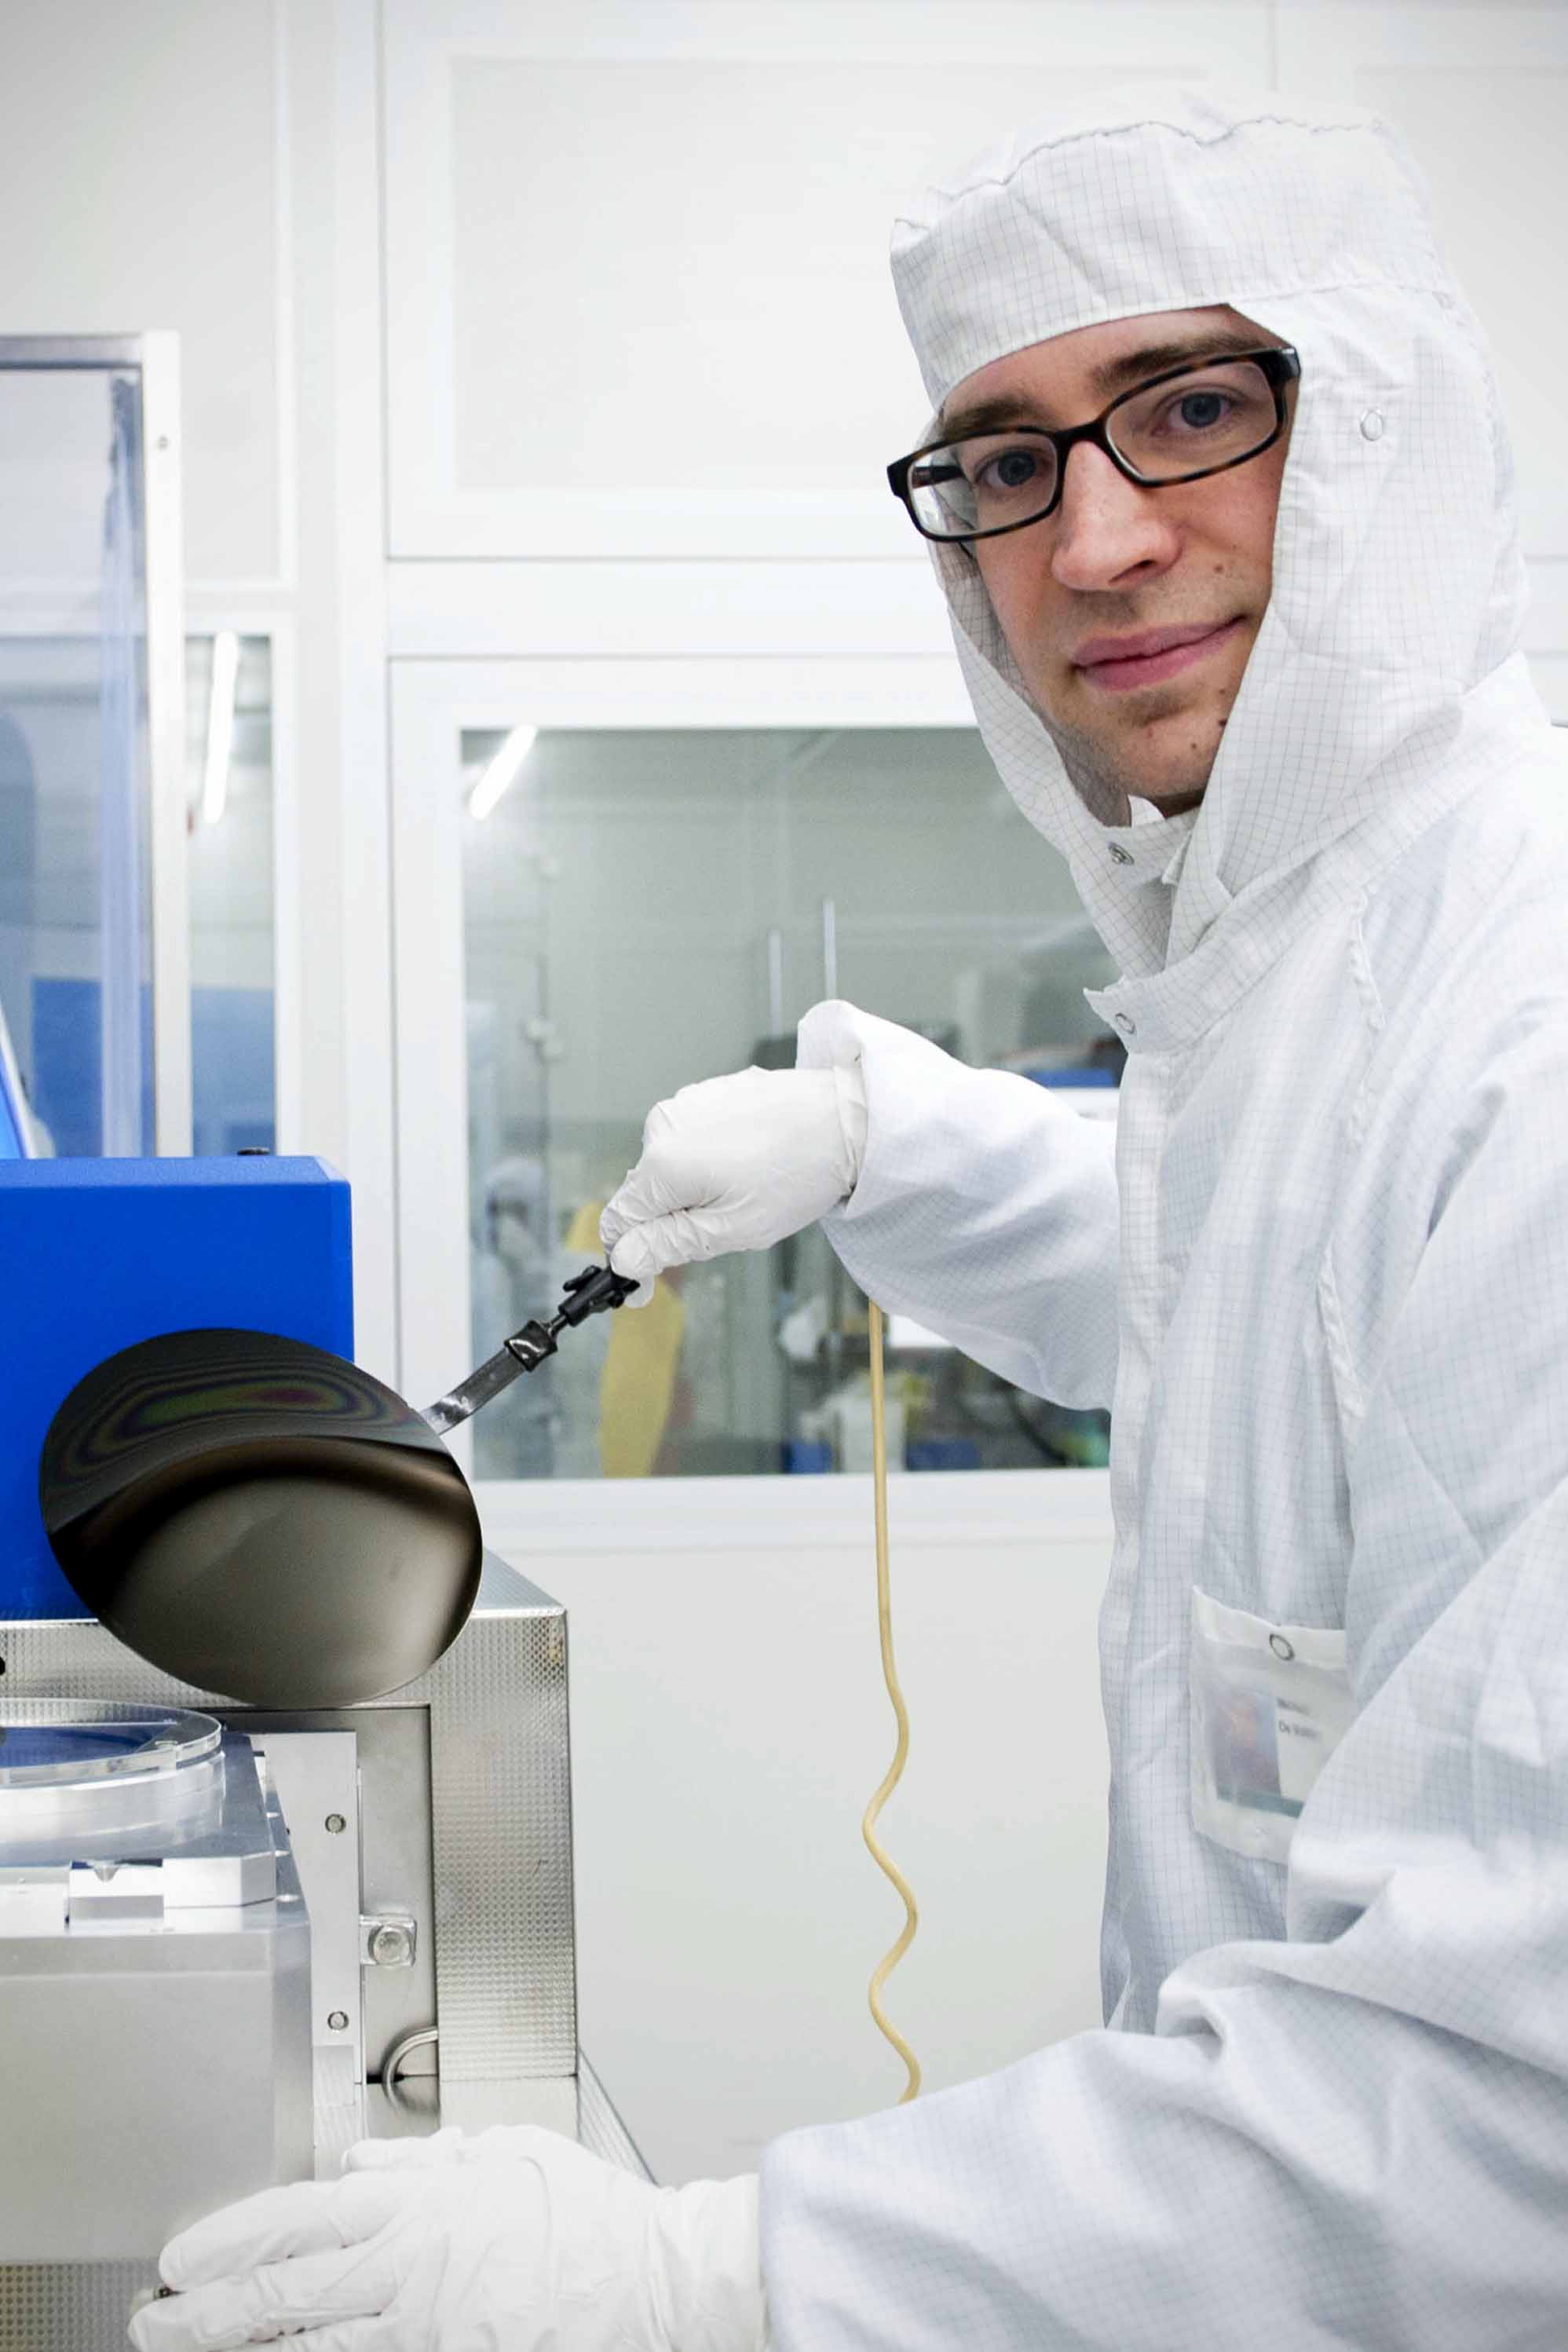 Dr De Volder holding a 200 mm wafer coated with carbon nanoparticles